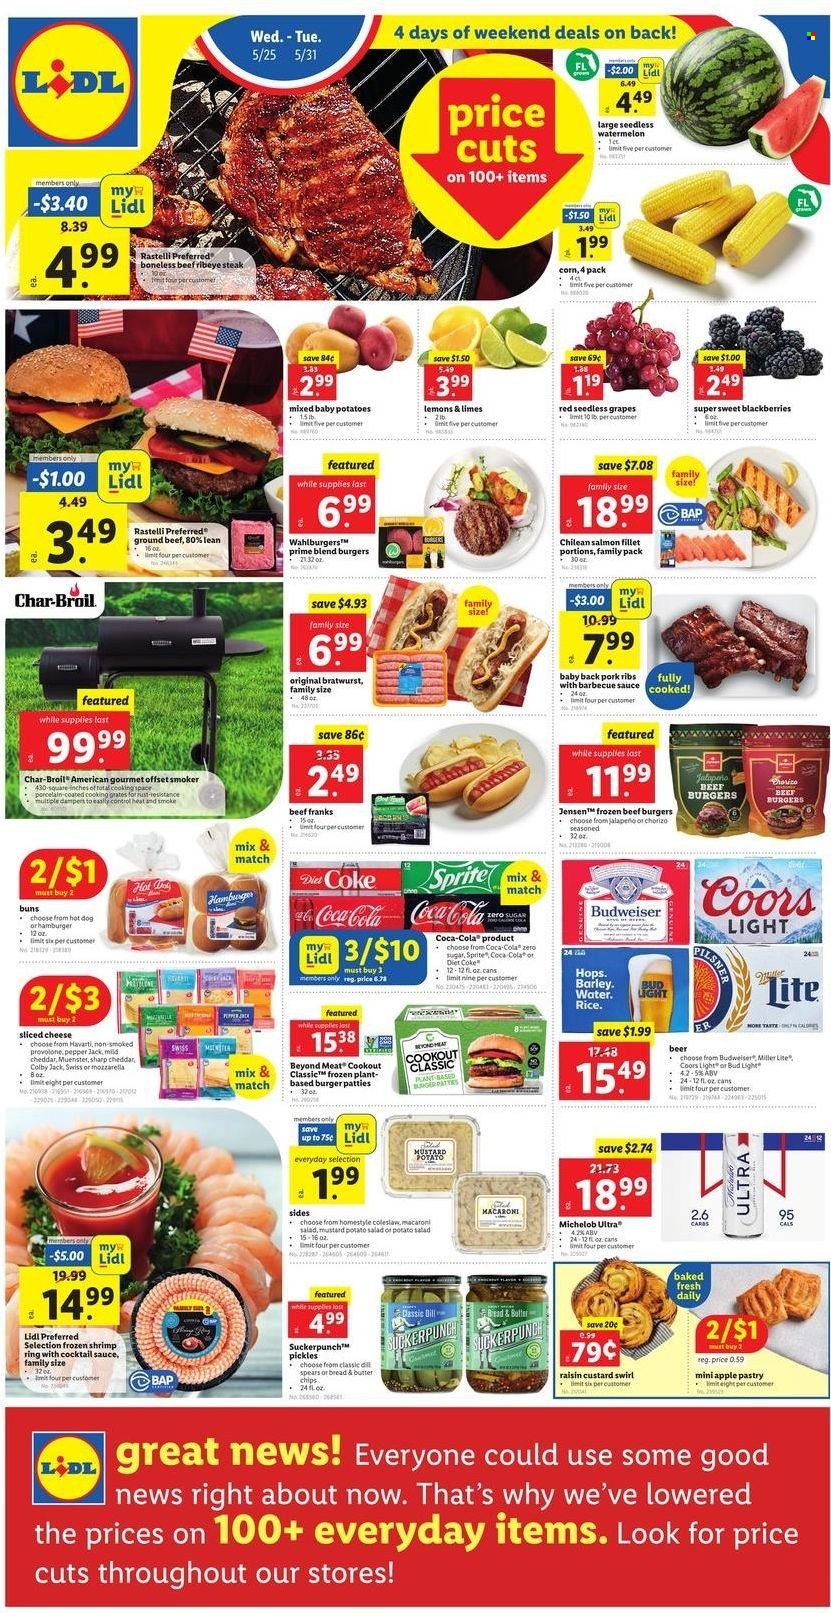 thumbnail - Lidl Flyer - 05/25/2022 - 05/31/2022 - Sales products - buns, corn, potatoes, jalapeño, blackberries, grapes, limes, seedless grapes, watermelon, salmon, salmon fillet, shrimps, coleslaw, hot dog, hamburger, beef burger, chorizo, bratwurst, potato salad, macaroni salad, Colby cheese, mild cheddar, mozzarella, sliced cheese, Havarti, Pepper Jack cheese, cheese, Münster cheese, Provolone, custard, butter, pickles, dill, BBQ sauce, cocktail sauce, mustard, Coca-Cola, Sprite, Diet Coke, Coca-Cola zero, beer, Bud Light, beef meat, beef steak, ground beef, steak, ribeye steak, burger patties, pork meat, pork ribs, pork back ribs, lid, Apple, Budweiser, Miller Lite, smoker, Coors, Michelob, lemons. Page 1.